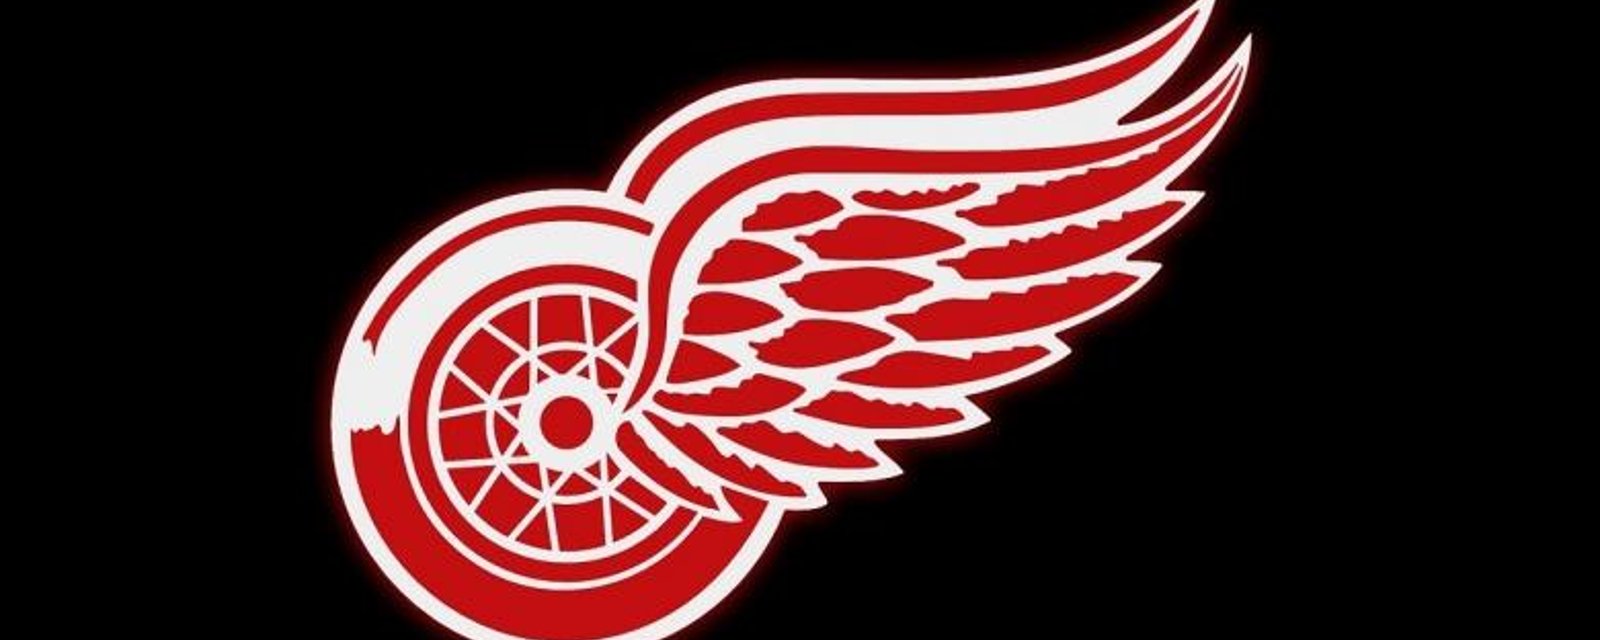 Former NHL GM believes Red Wings are going “real big” in free agency.